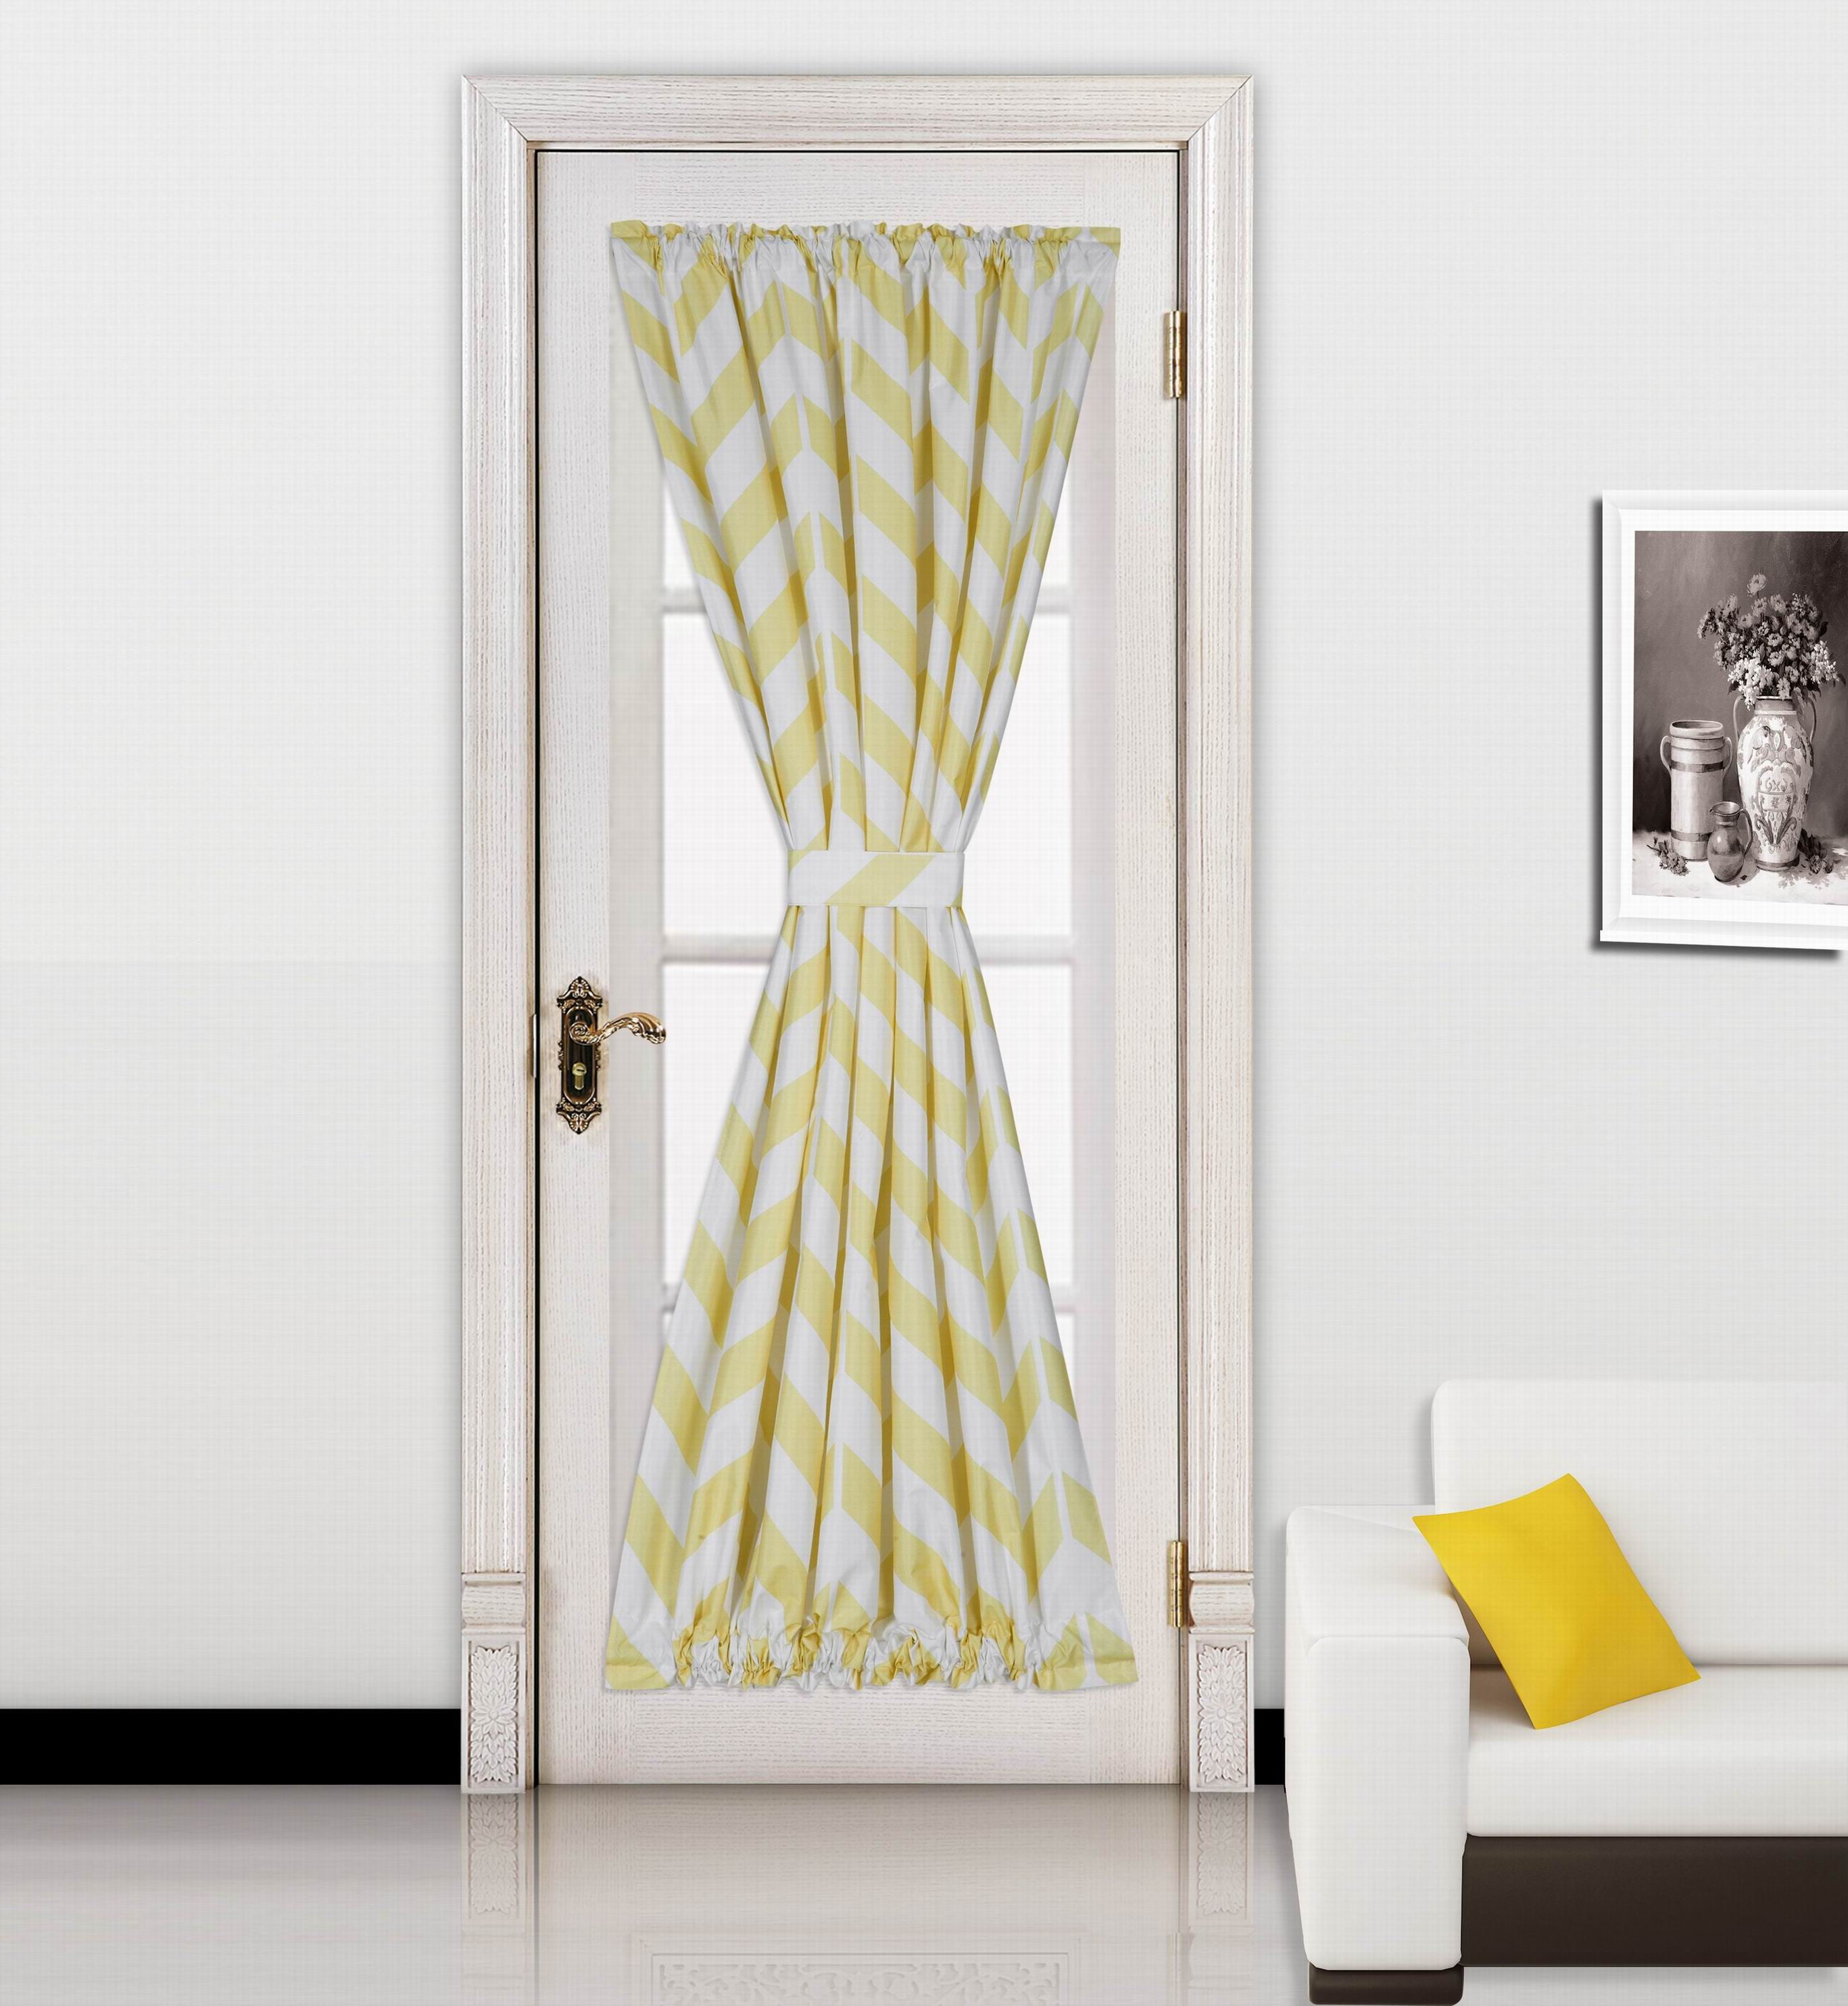 INSULATED FOAM LINED THERMAL BLACKOUT GROMMET WINDOW CURTAIN PANEL  1PC YELLOW 